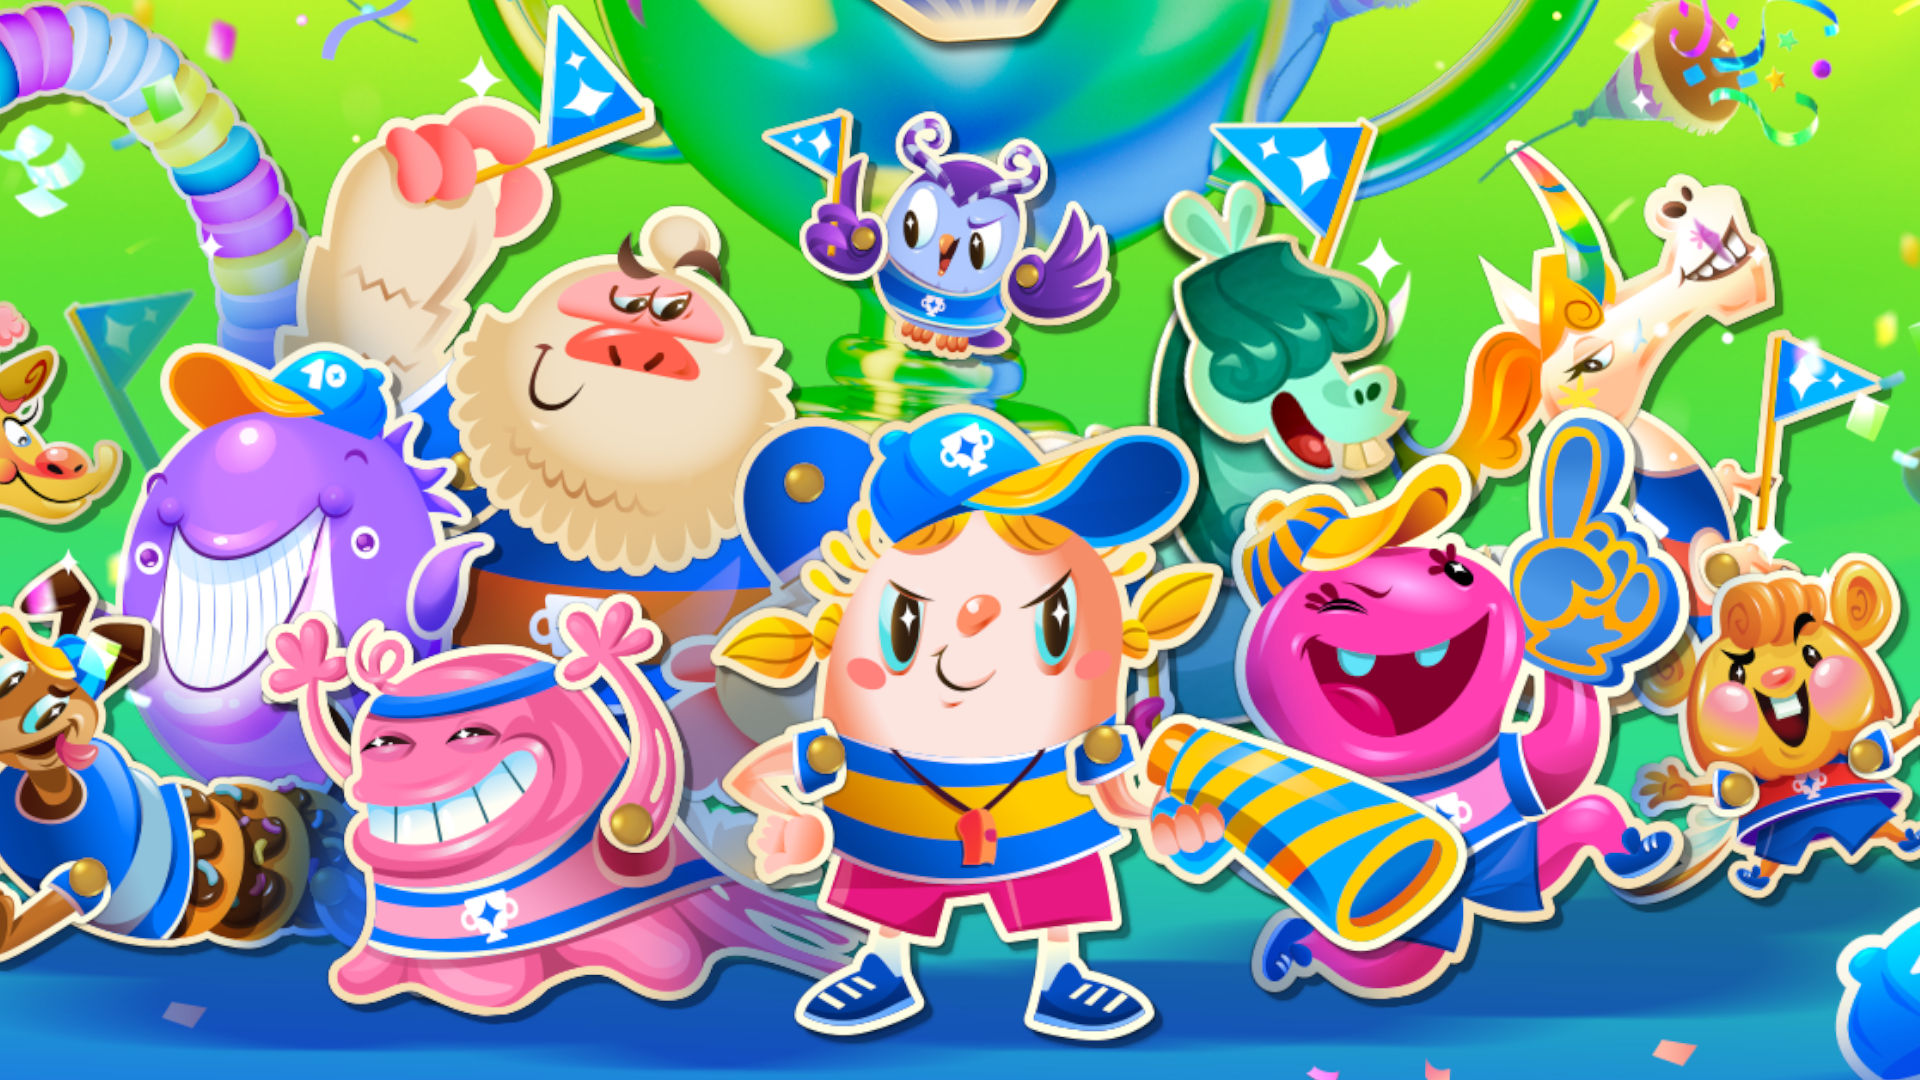 Candy Crush Saga's 10th Anniversary: 10 Things You Didn't Know